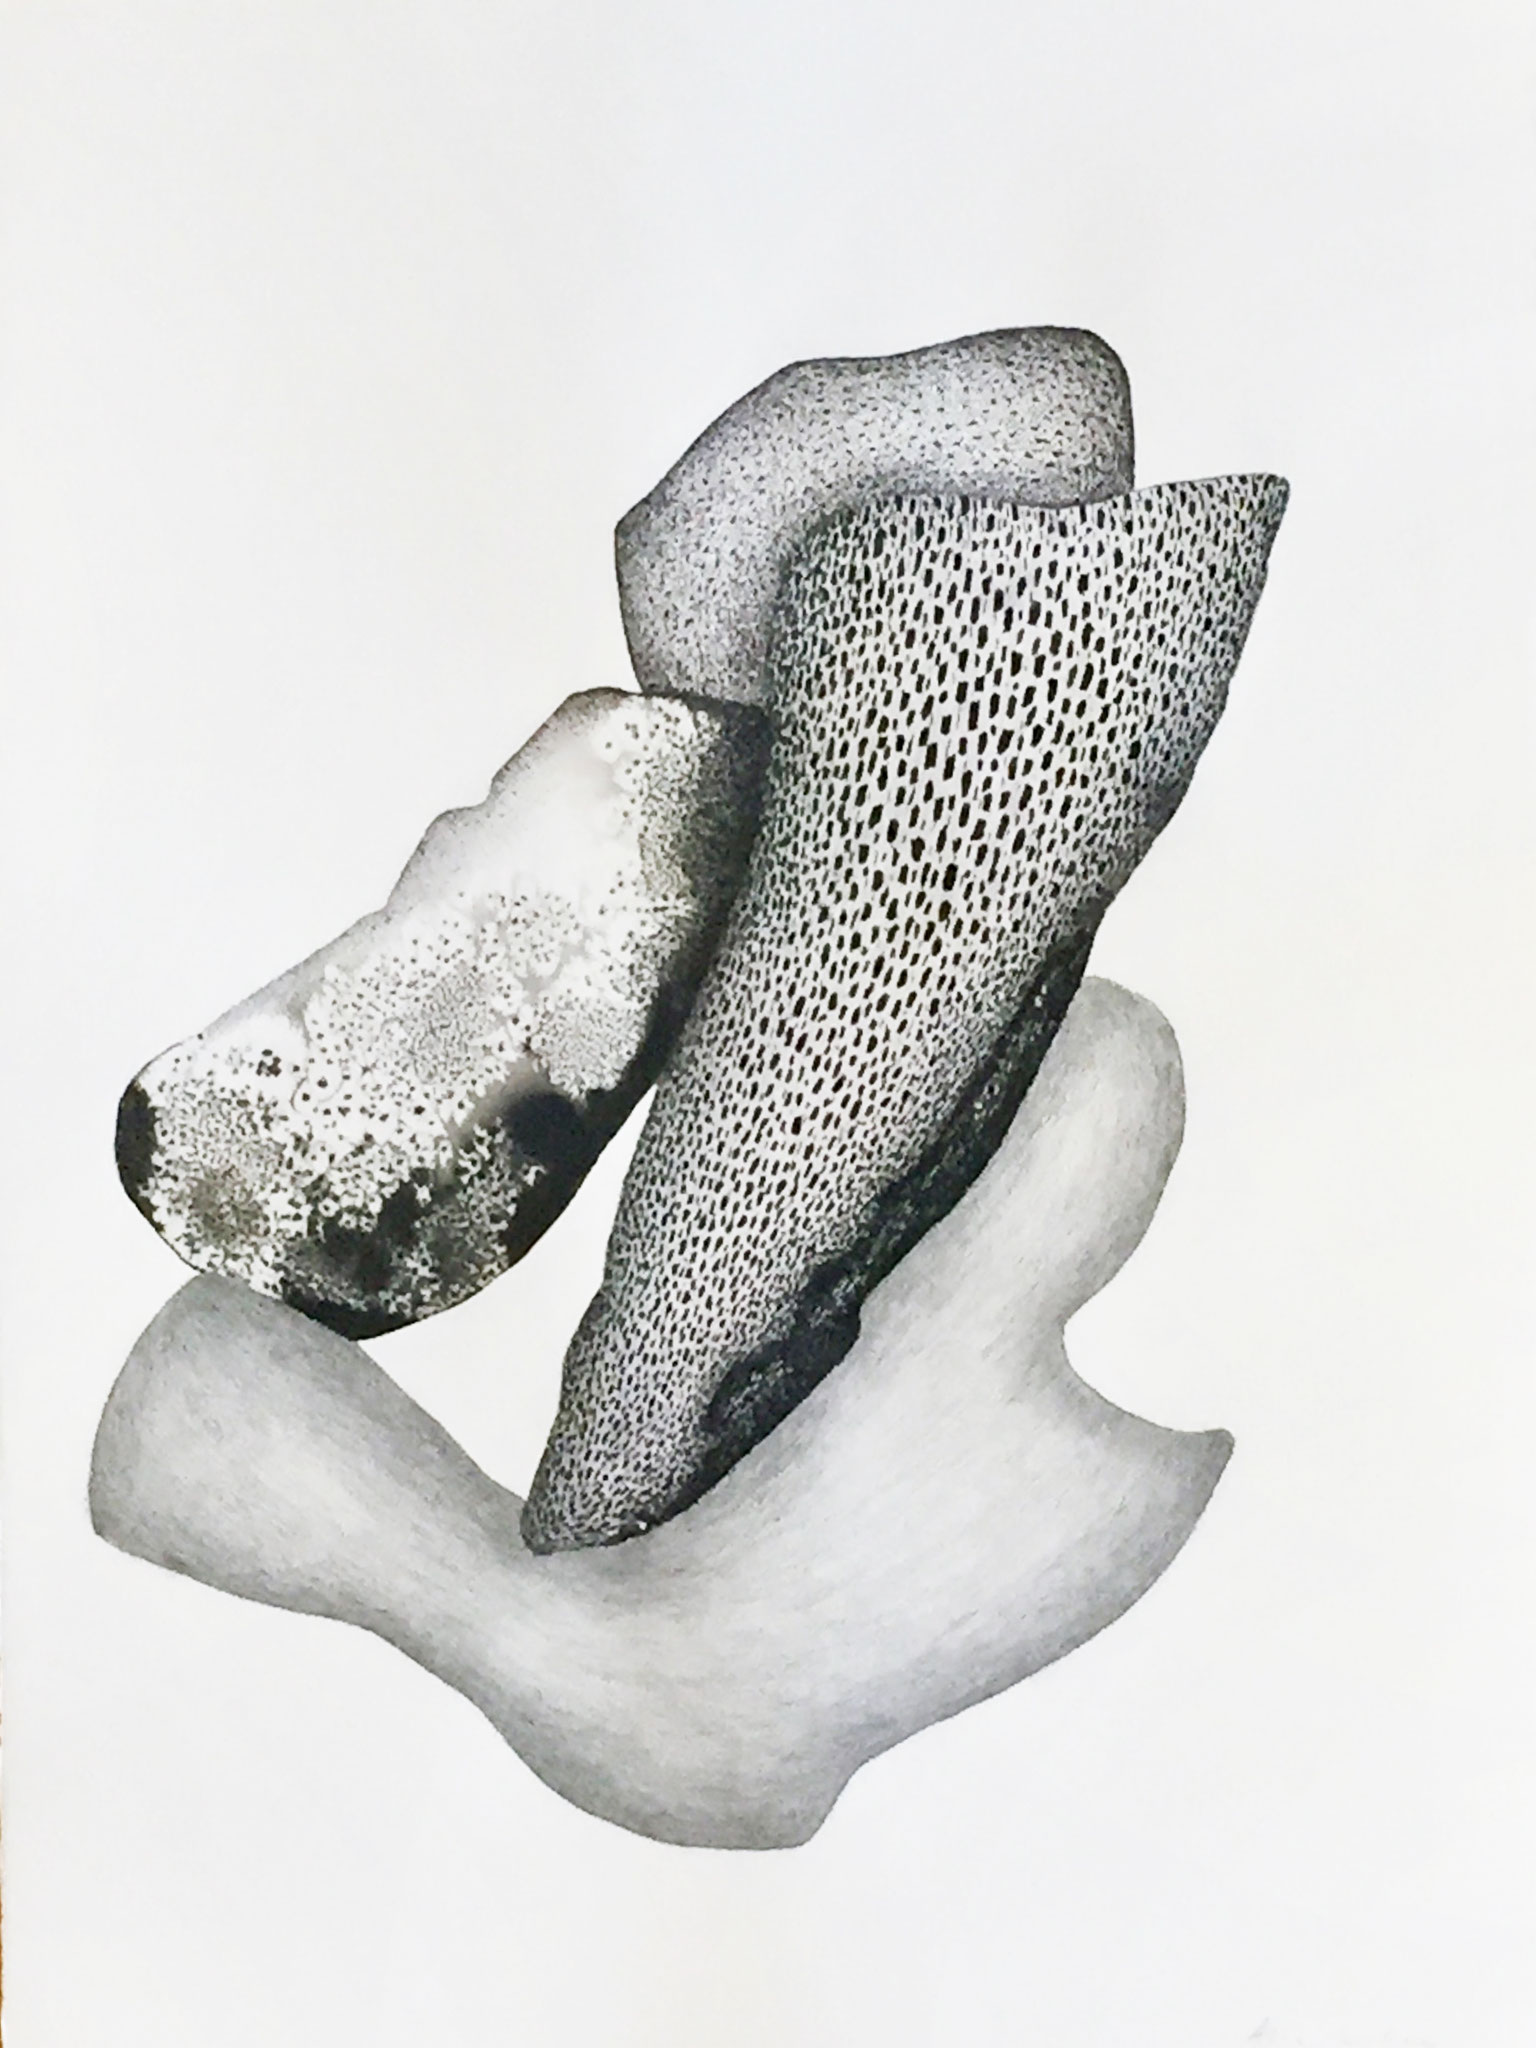 Roches, Ink pencil & salt crystals on Arches paper,  50 x 70cm   courtesy Galerie Armel Soyer